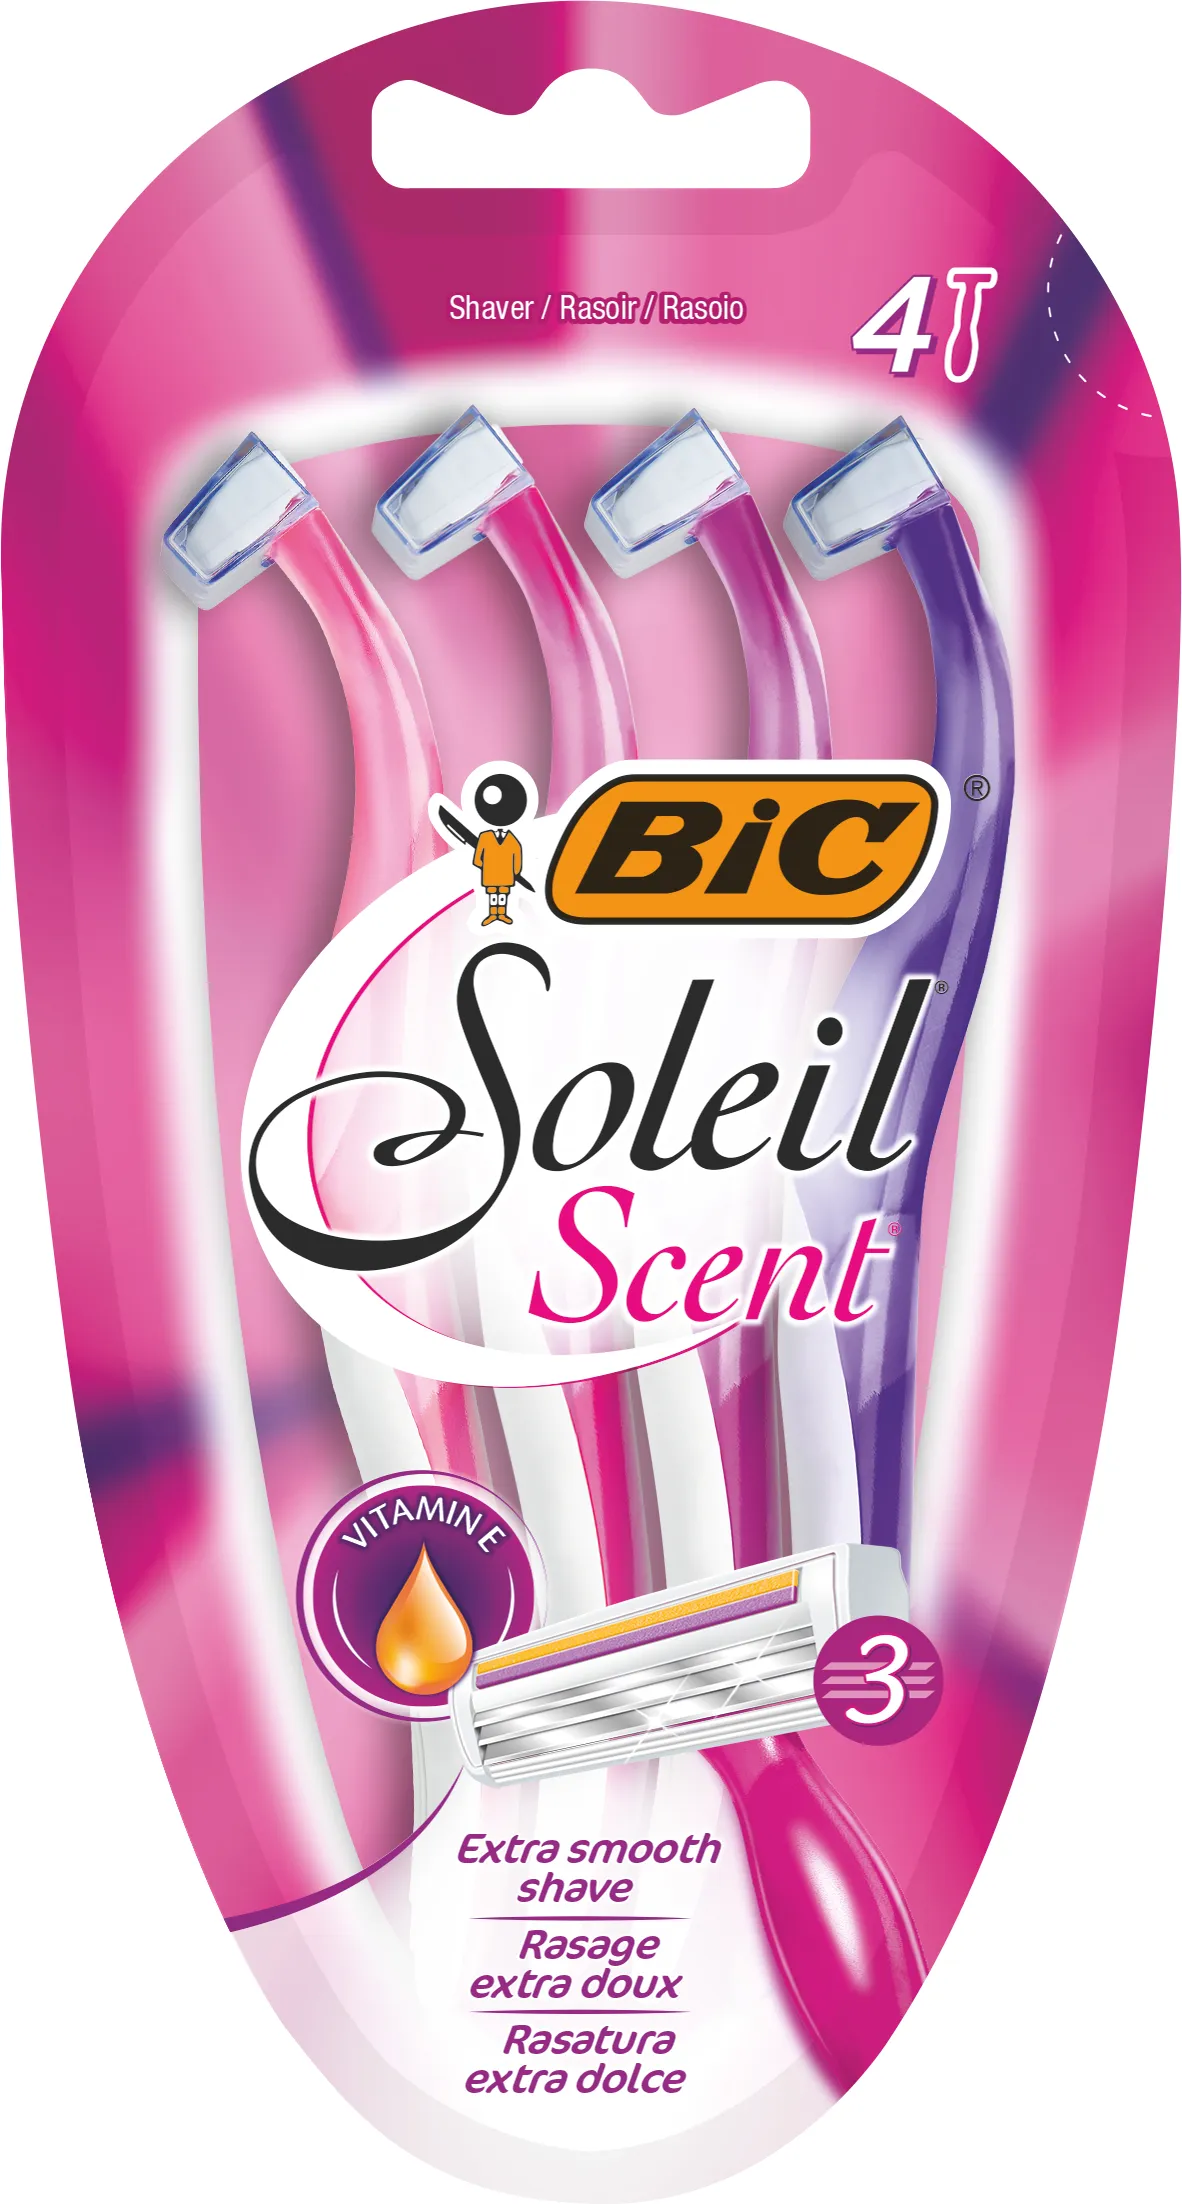 SH F SOLEIL SCENT BLISTER 4 (10X4 S))